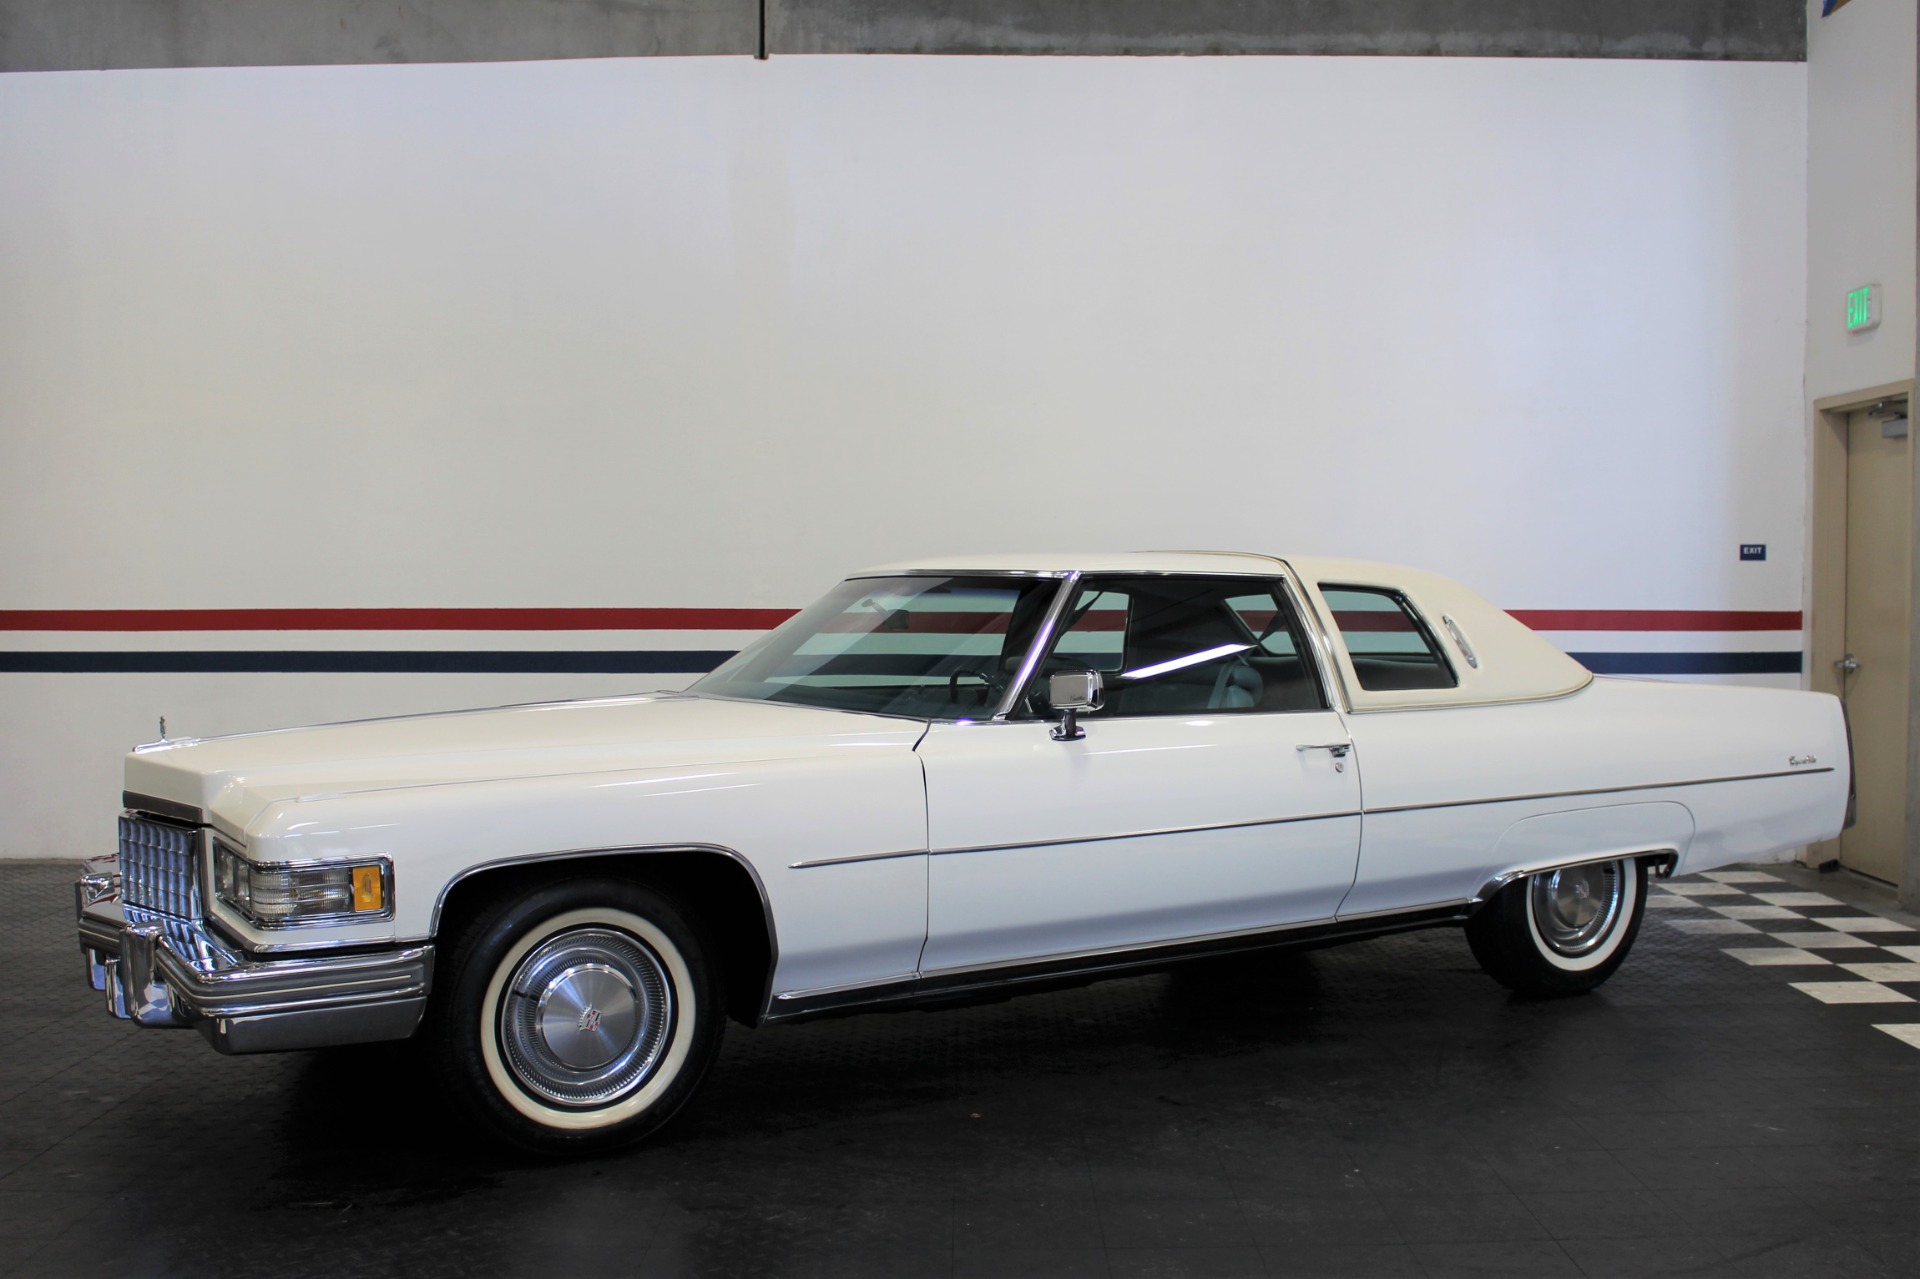 Used-1976-Cadillac-Coupe-De-Ville